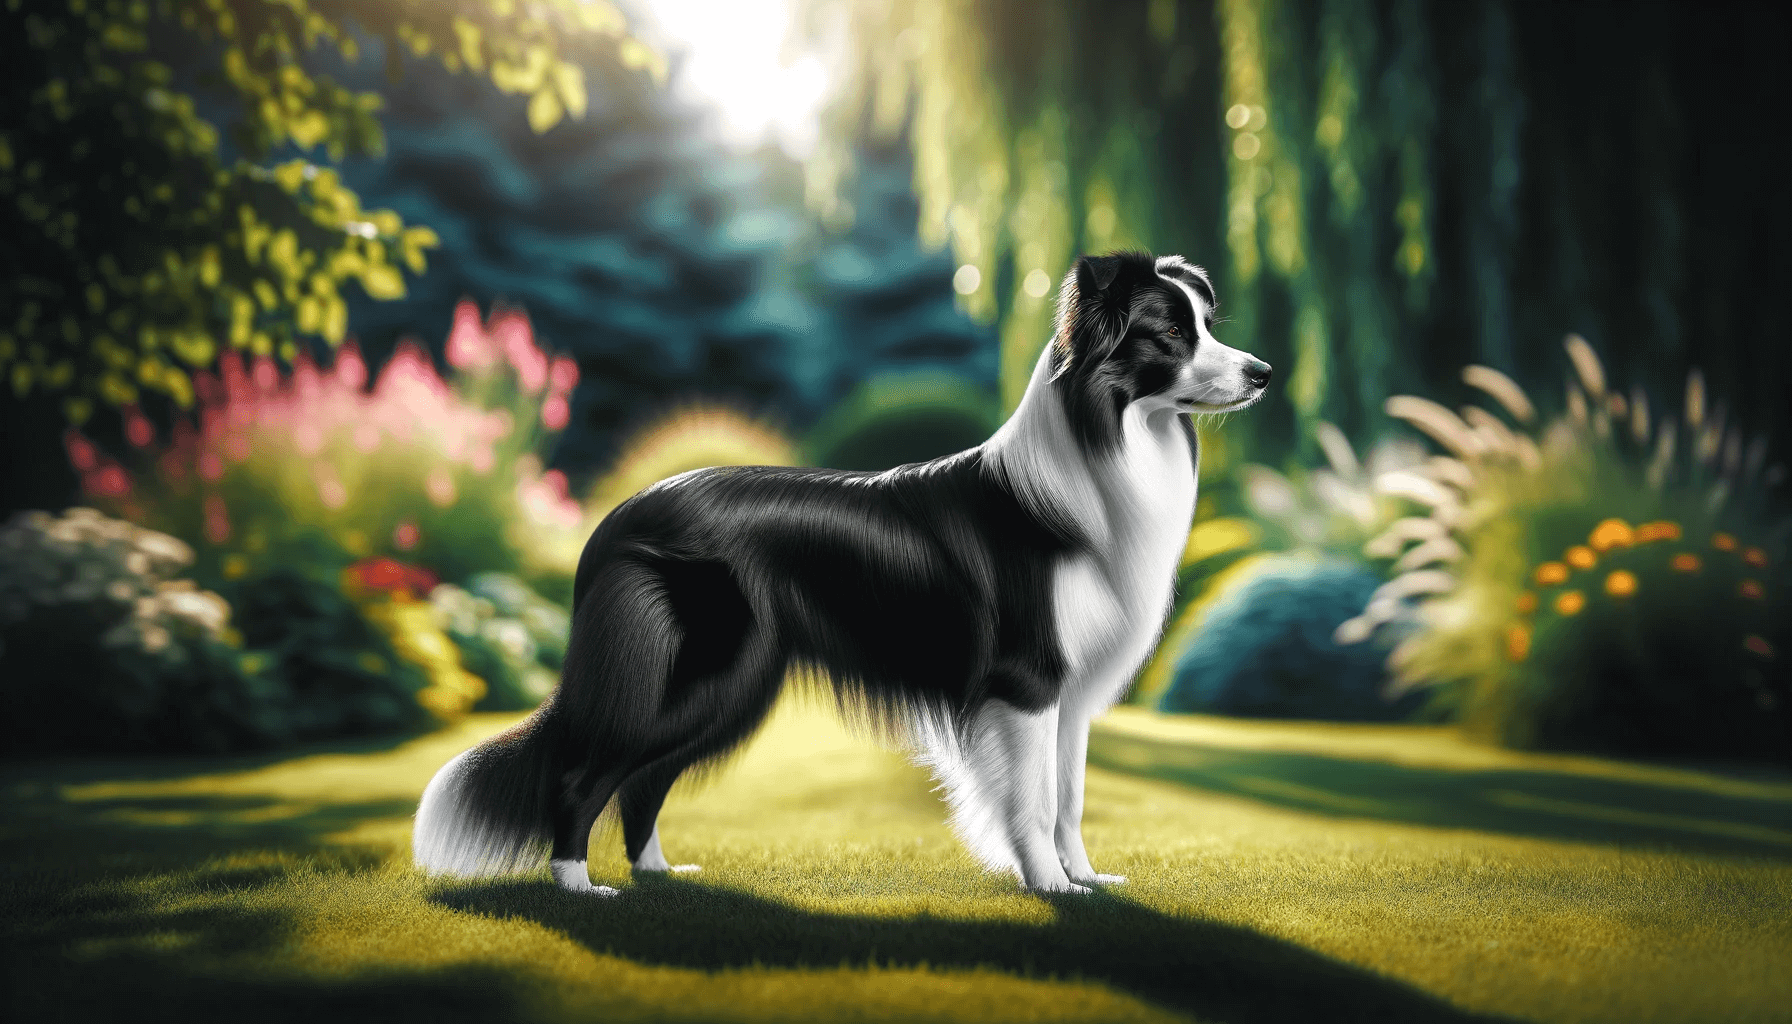 Smooth Coat Border Collie standing in a picturesque outdoor setting.